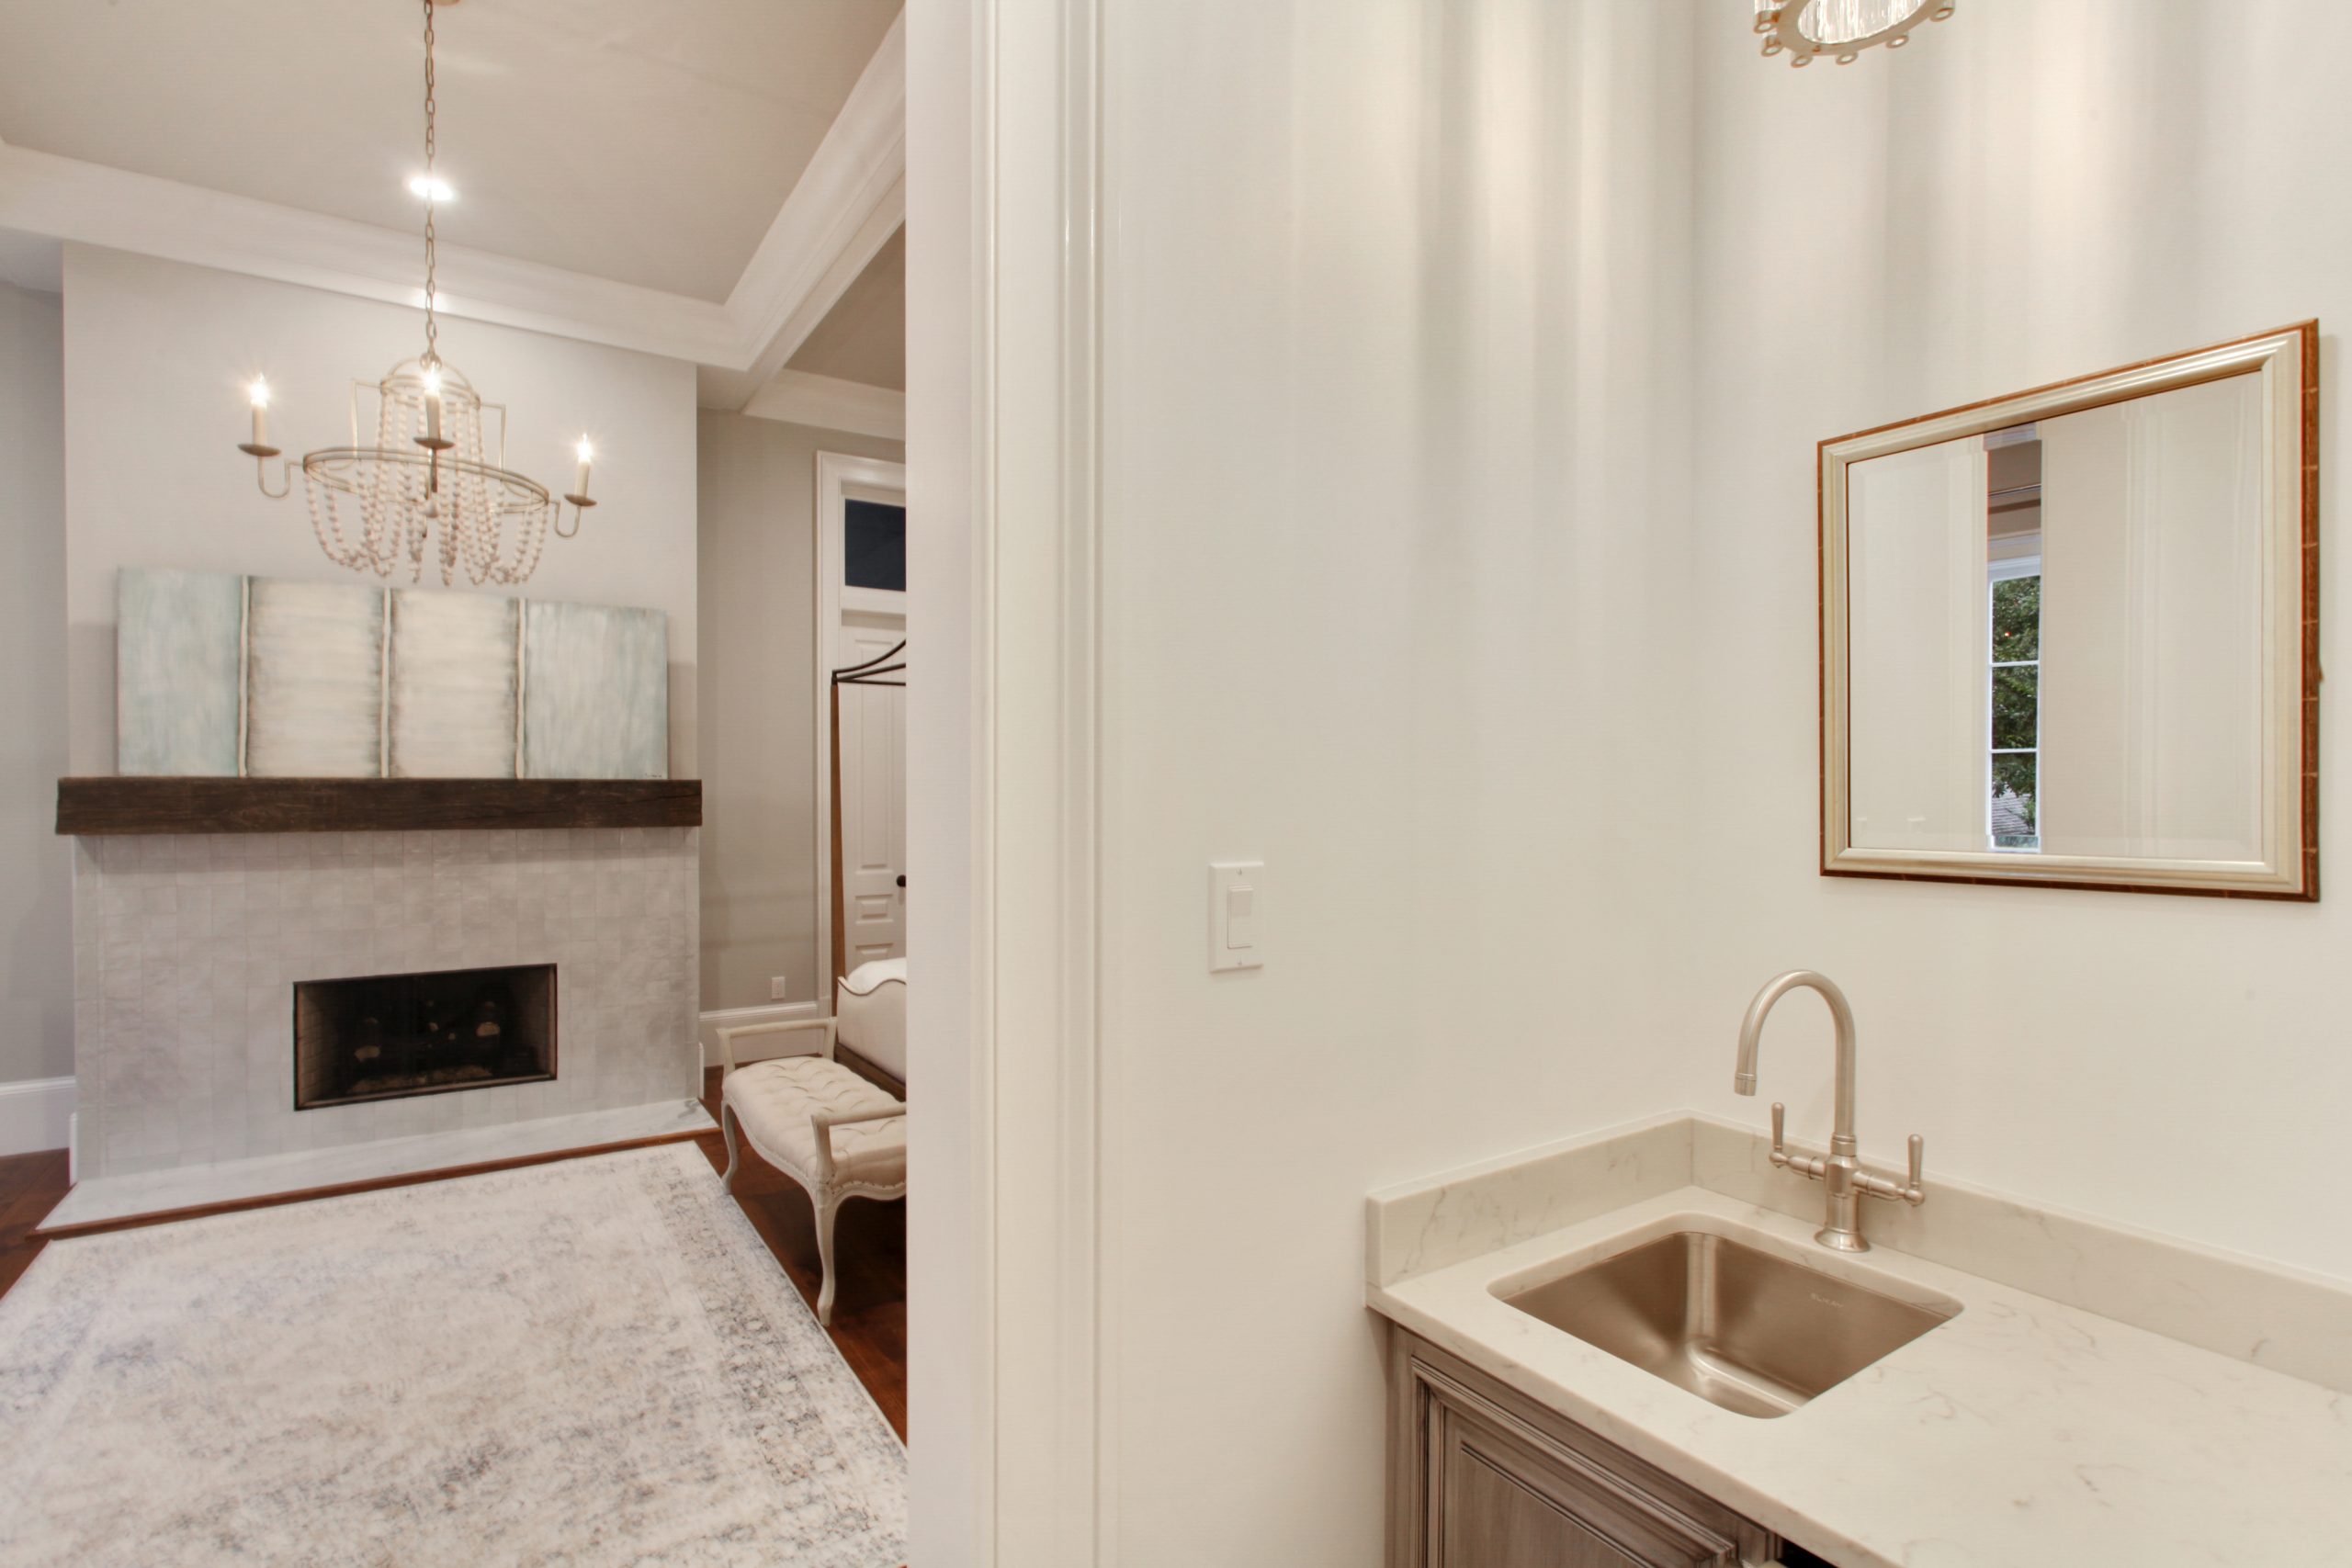 Primary Suite Dressing Area of Audubon House luxury new construction custom home designed and built by DMG